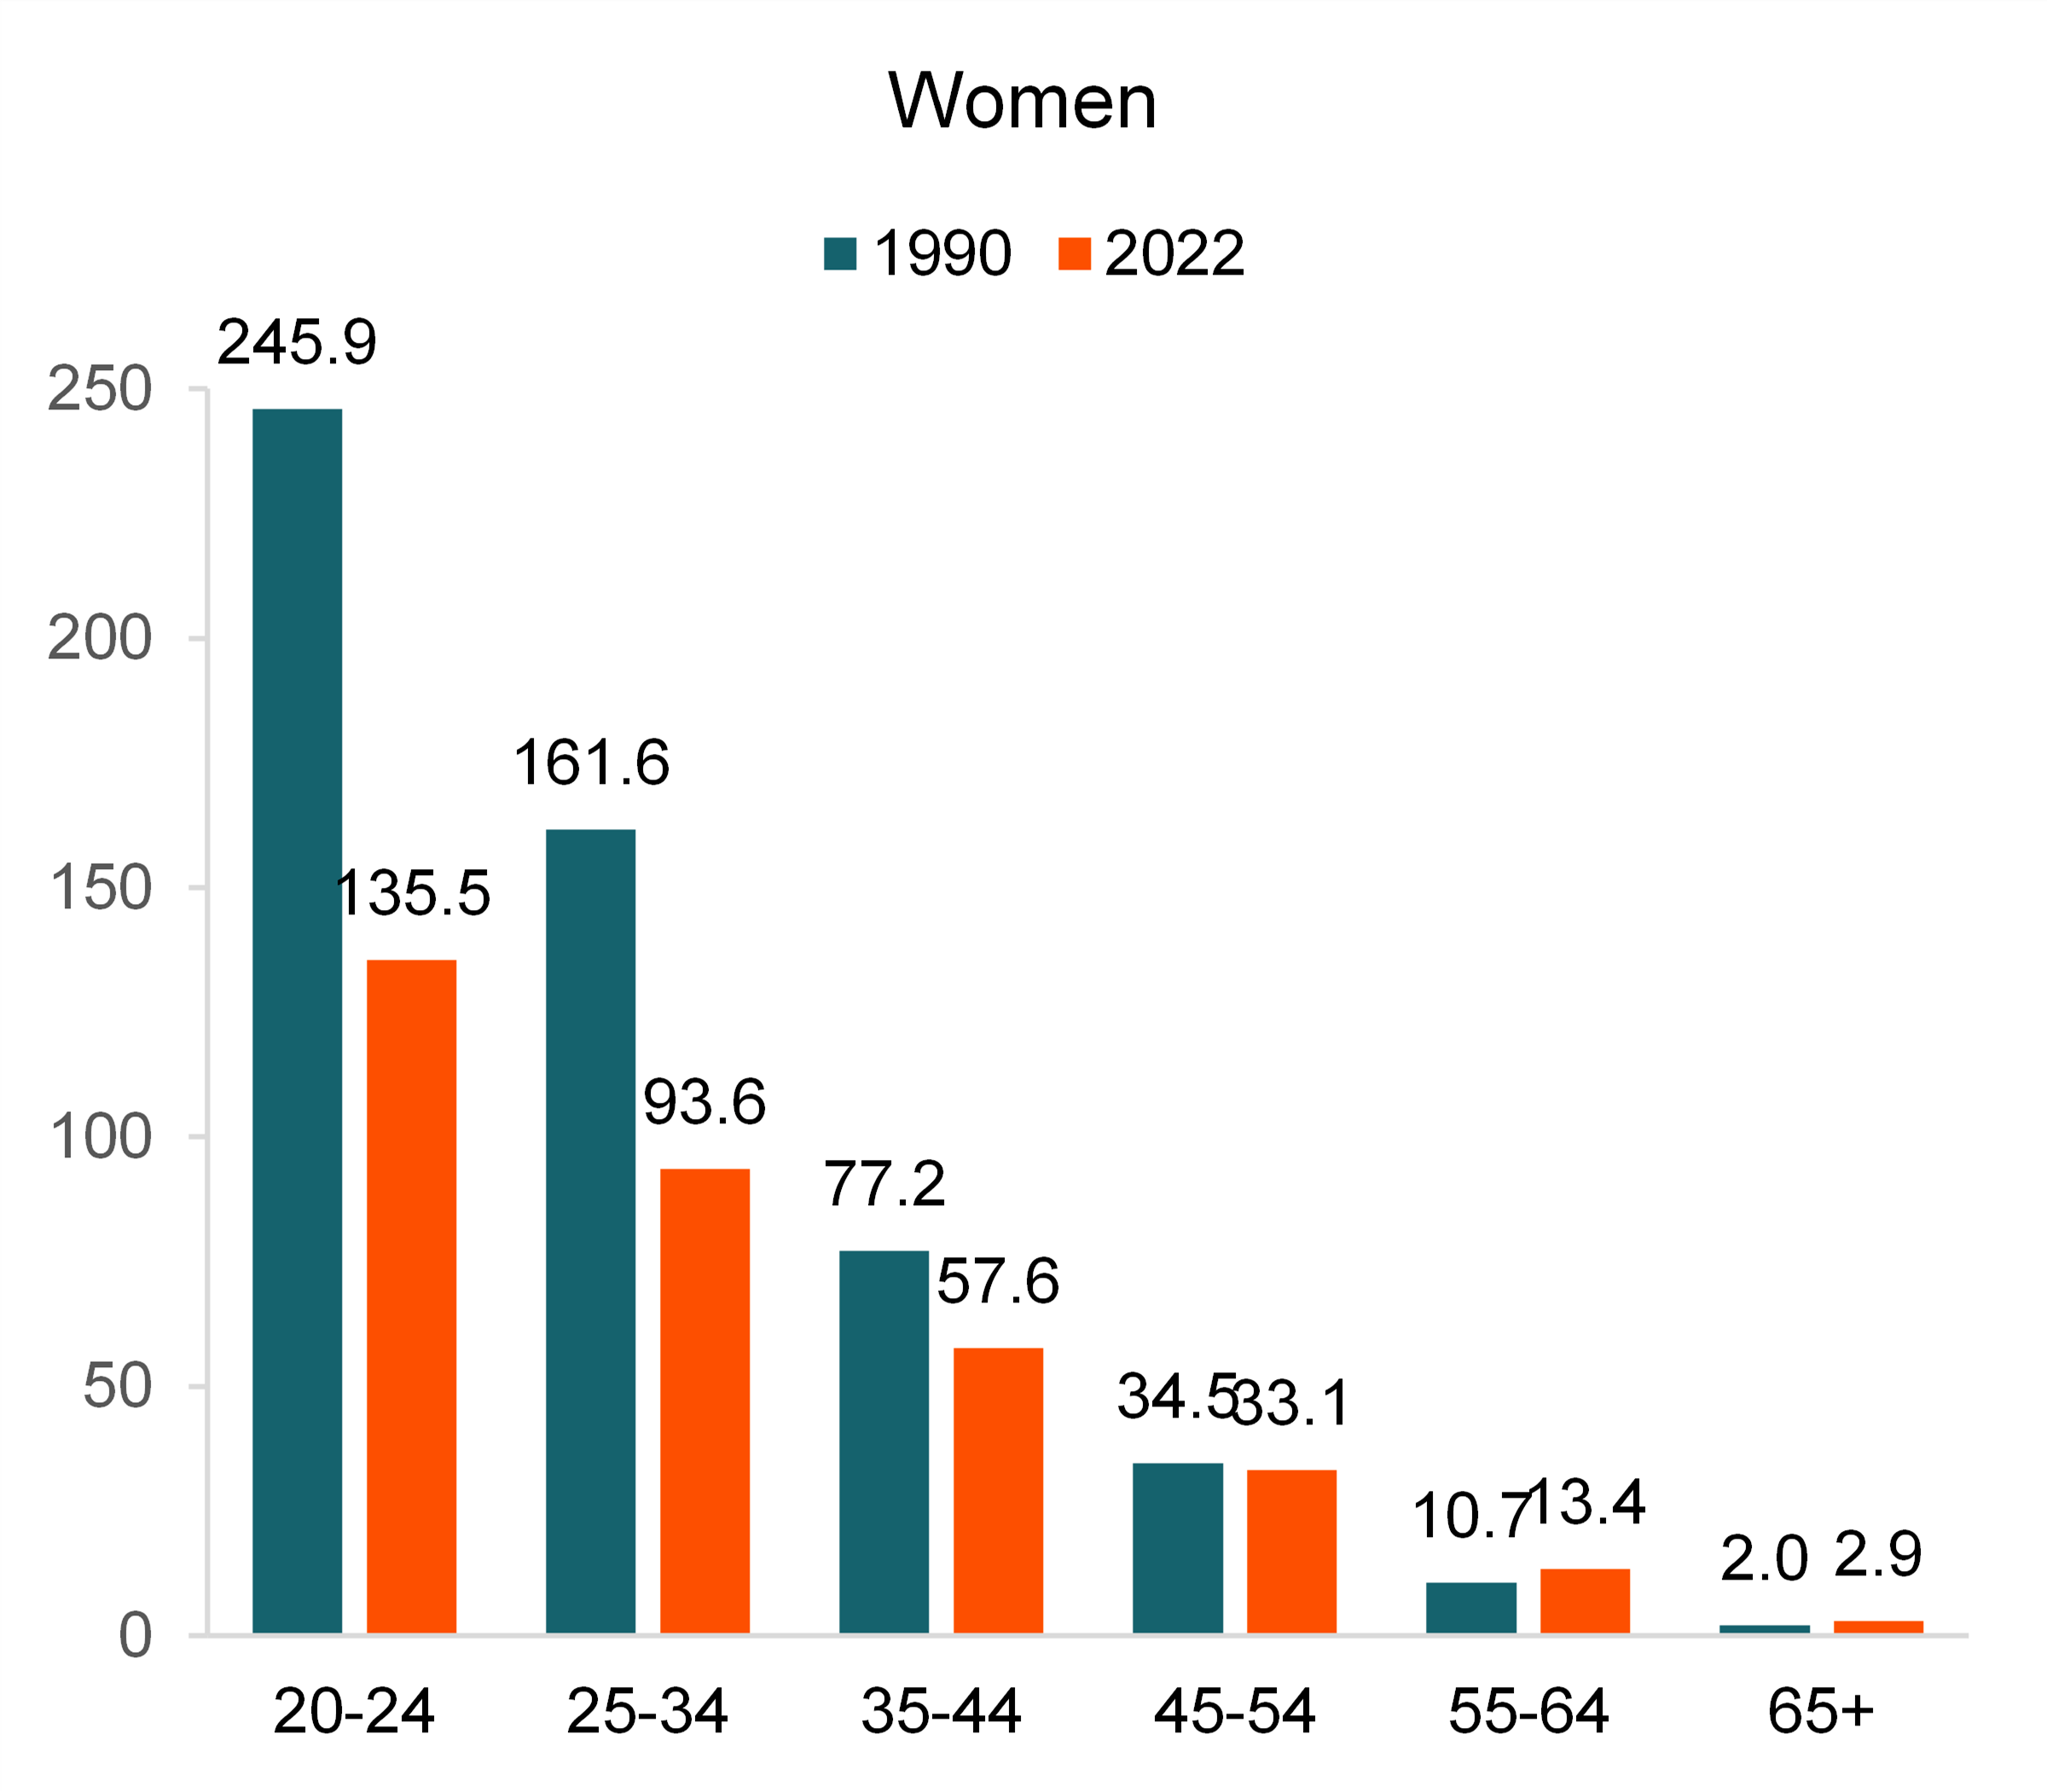 Figure 3. Women’s Remarriage Rates by Age Groups, 1990 & 2022